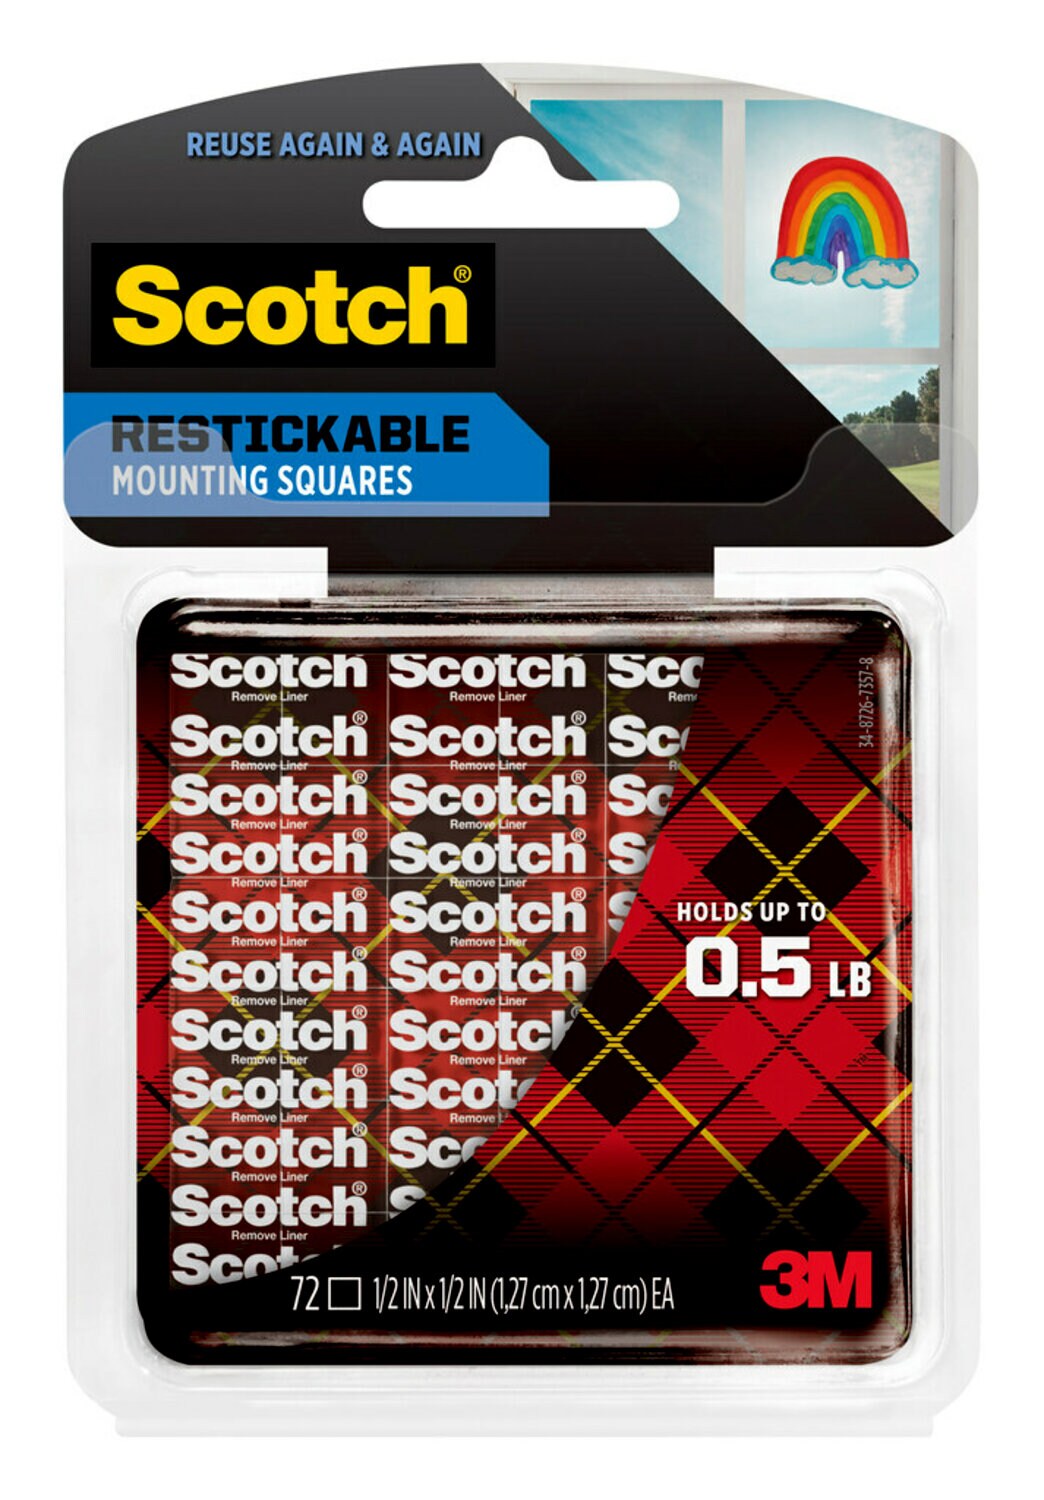 7100245385 - Scotch Restickable Mounting Squares R103S, 1/2 in x 1/2 in (1.27 cm x 1.27 cm) 72/pk